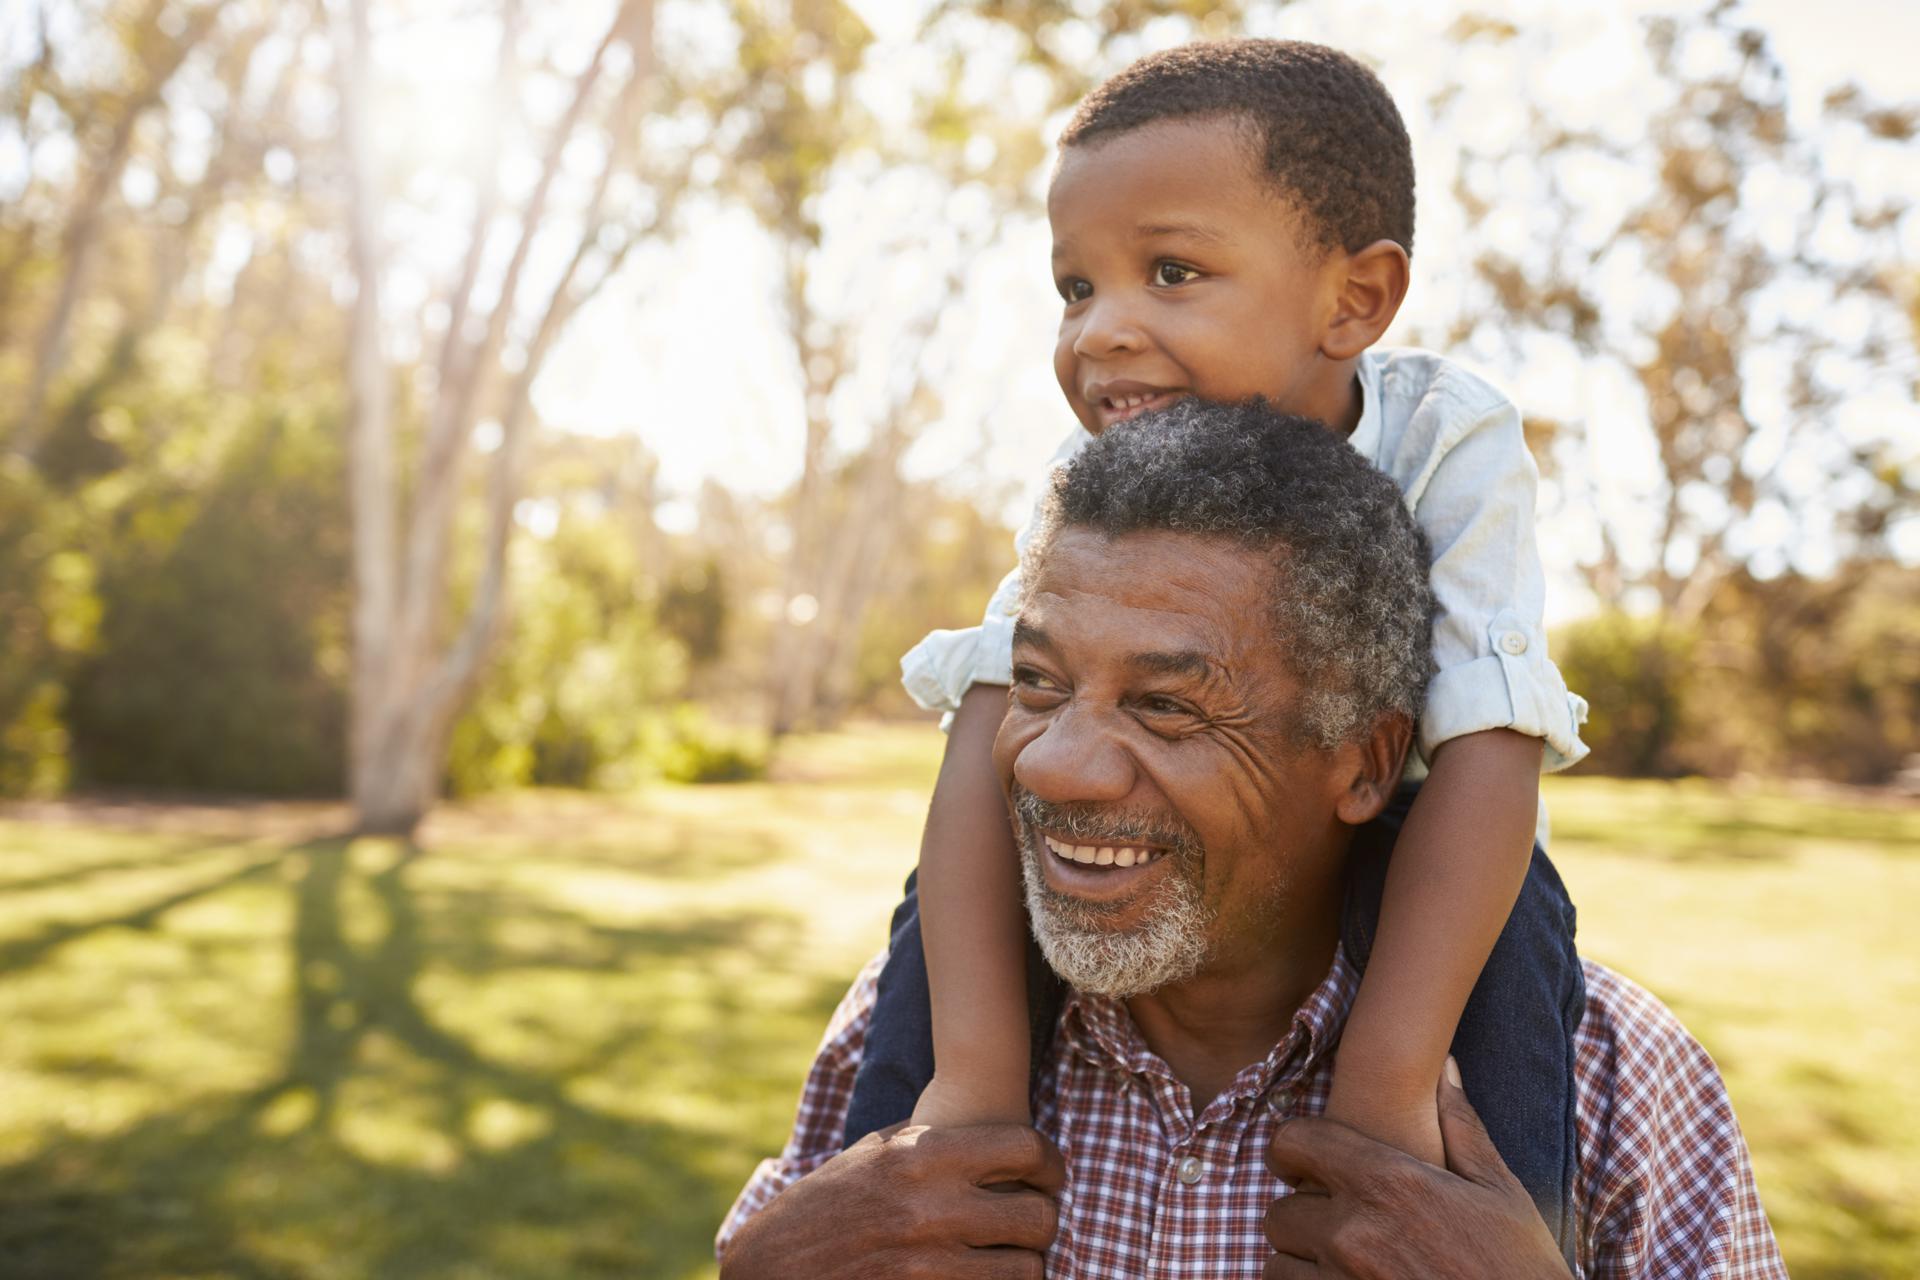 Black man with graying hair has a young child sitting on his shoulders outside in a park with a lot of trees and green grass.